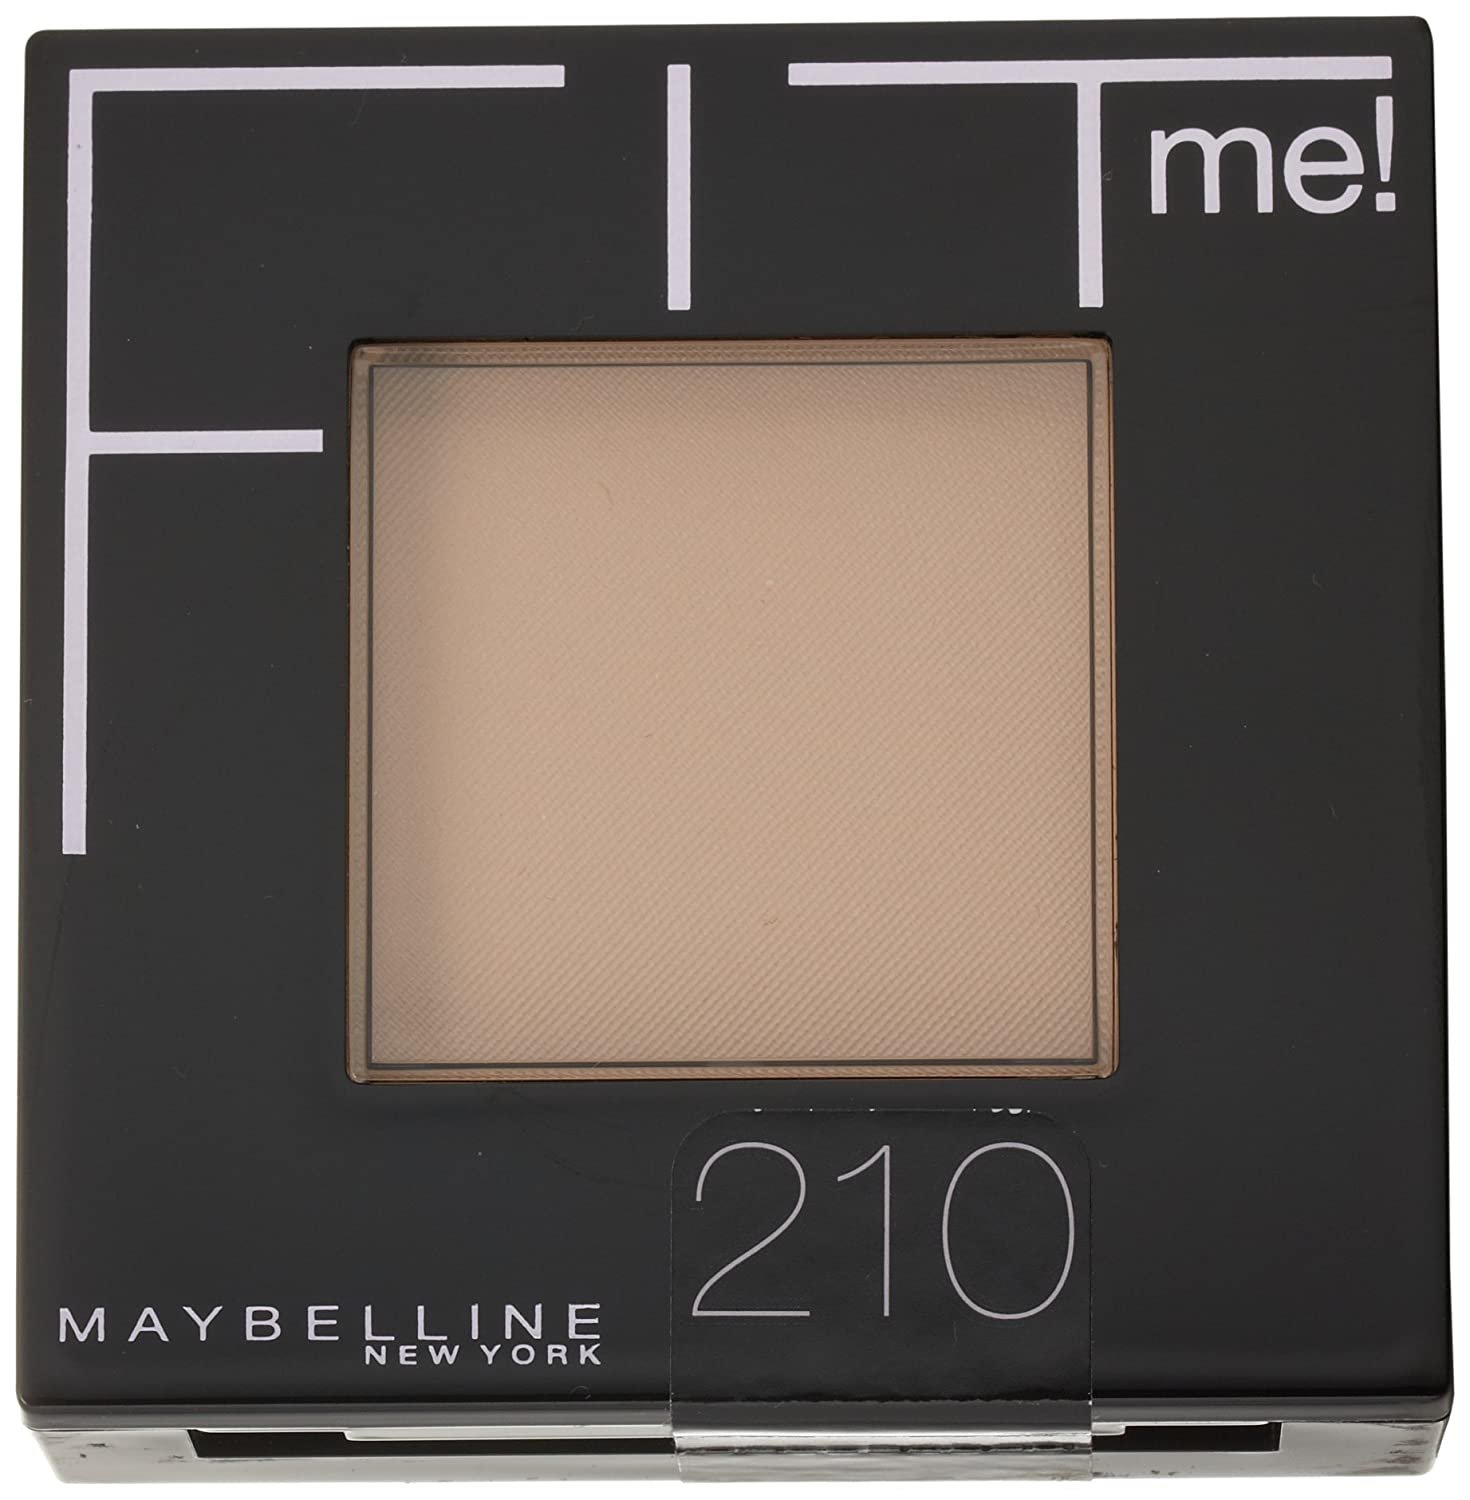 Maybelline New York Fit Me! Powder, 210 Sandy Beige, 0.3 Ounce - image 2 of 6